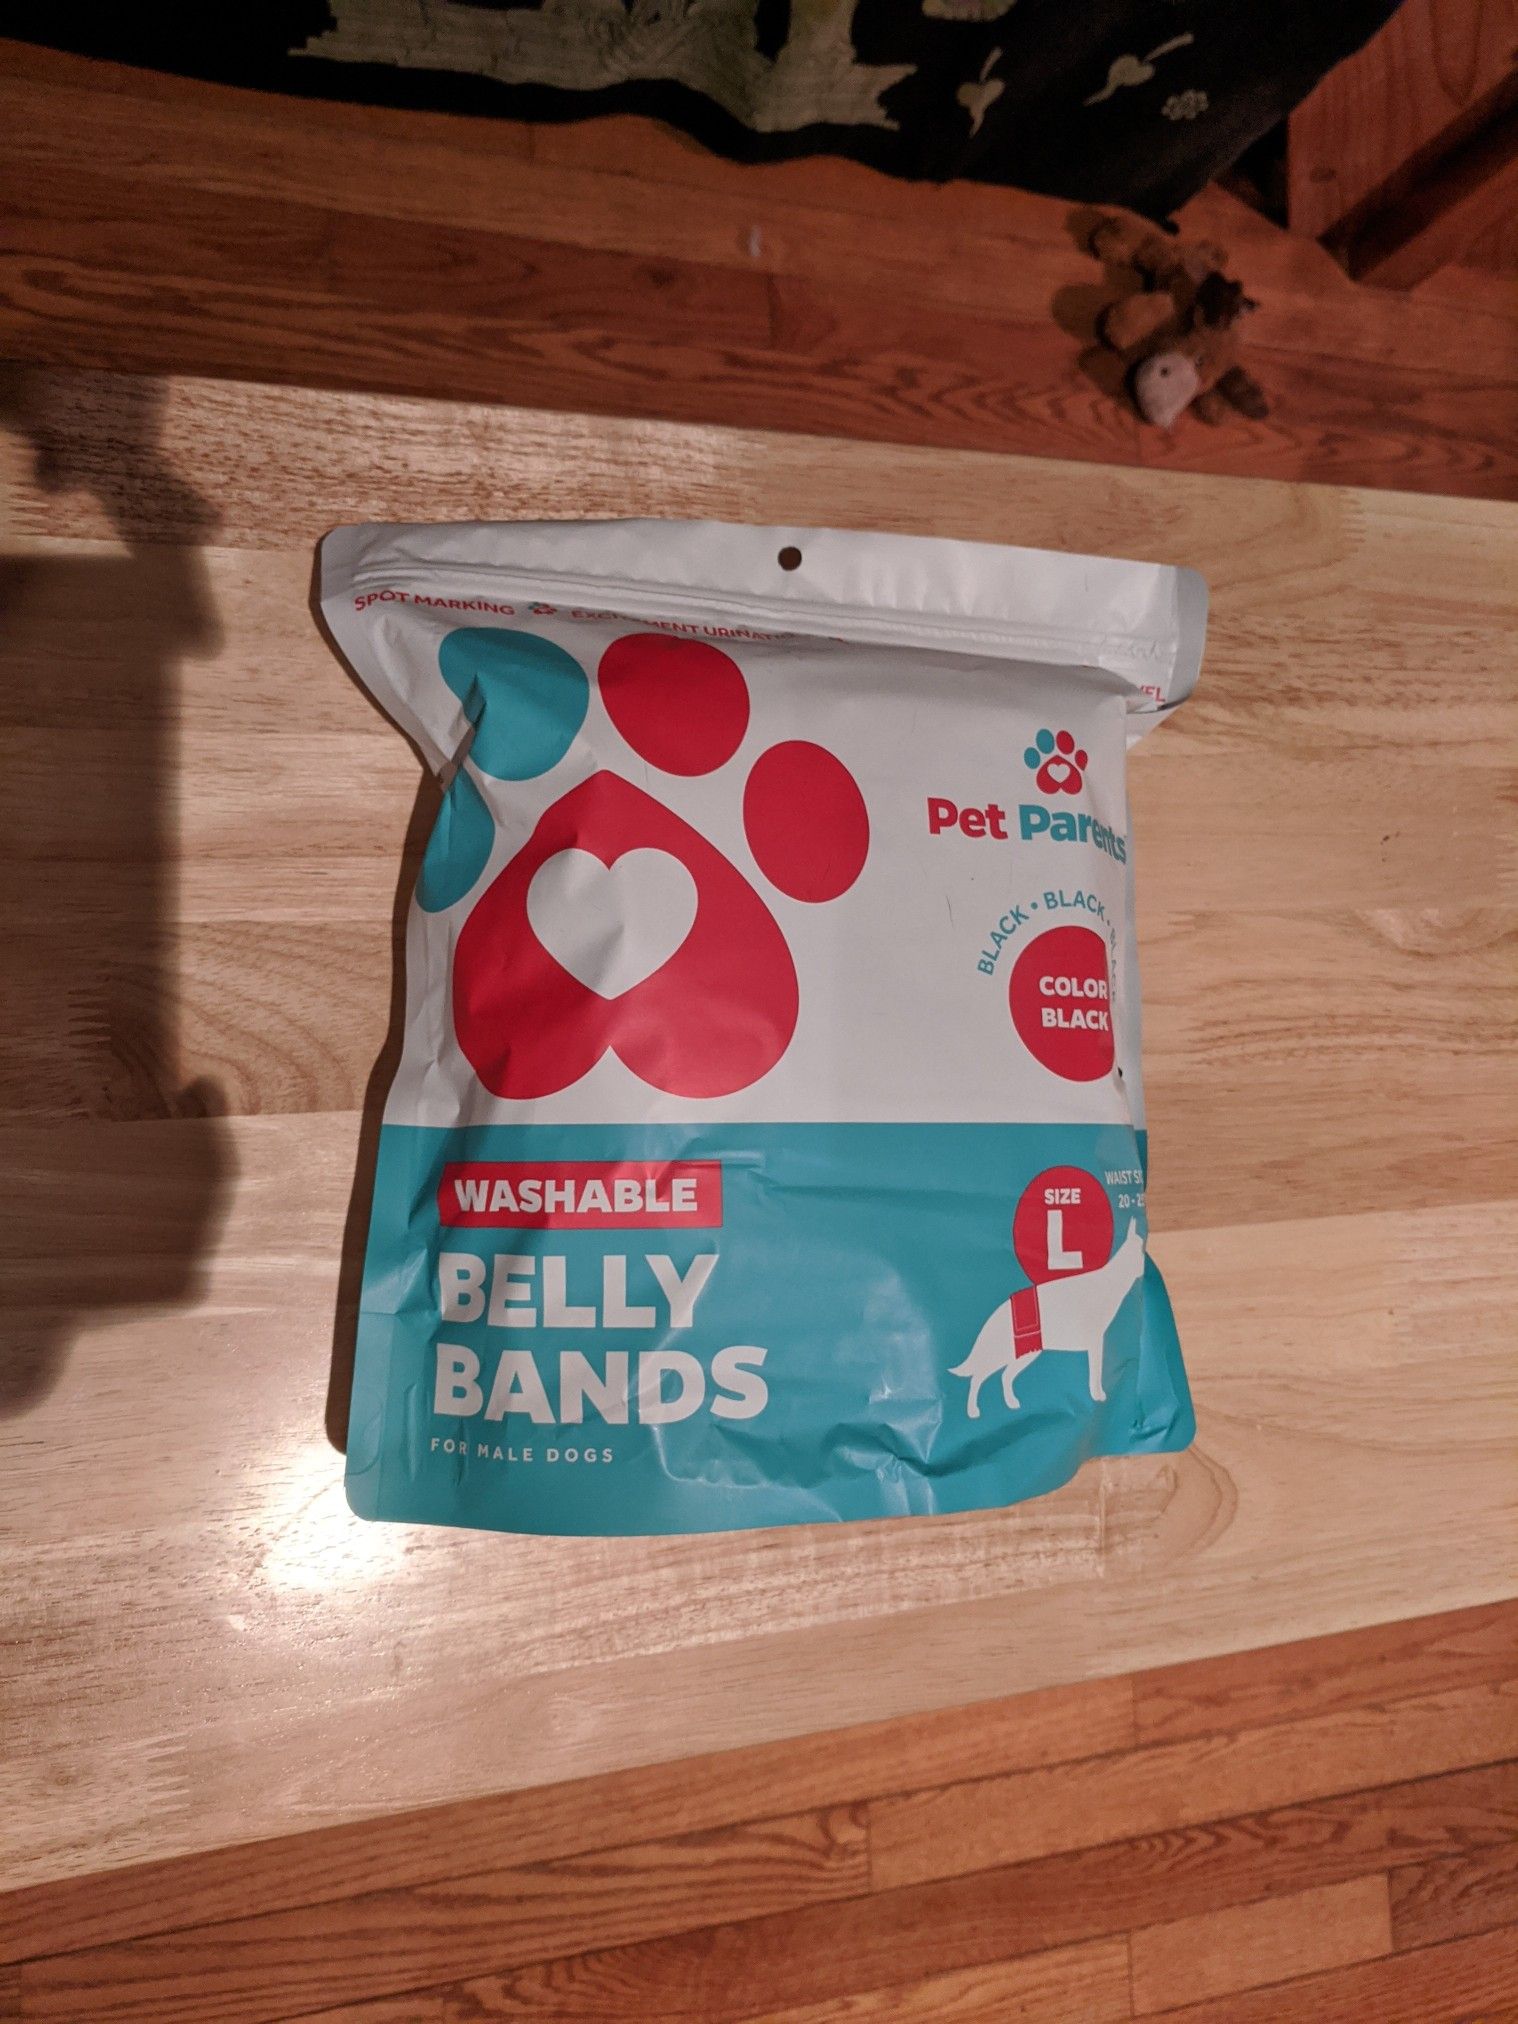 Canine Male Wrap (a/k/a belly band)